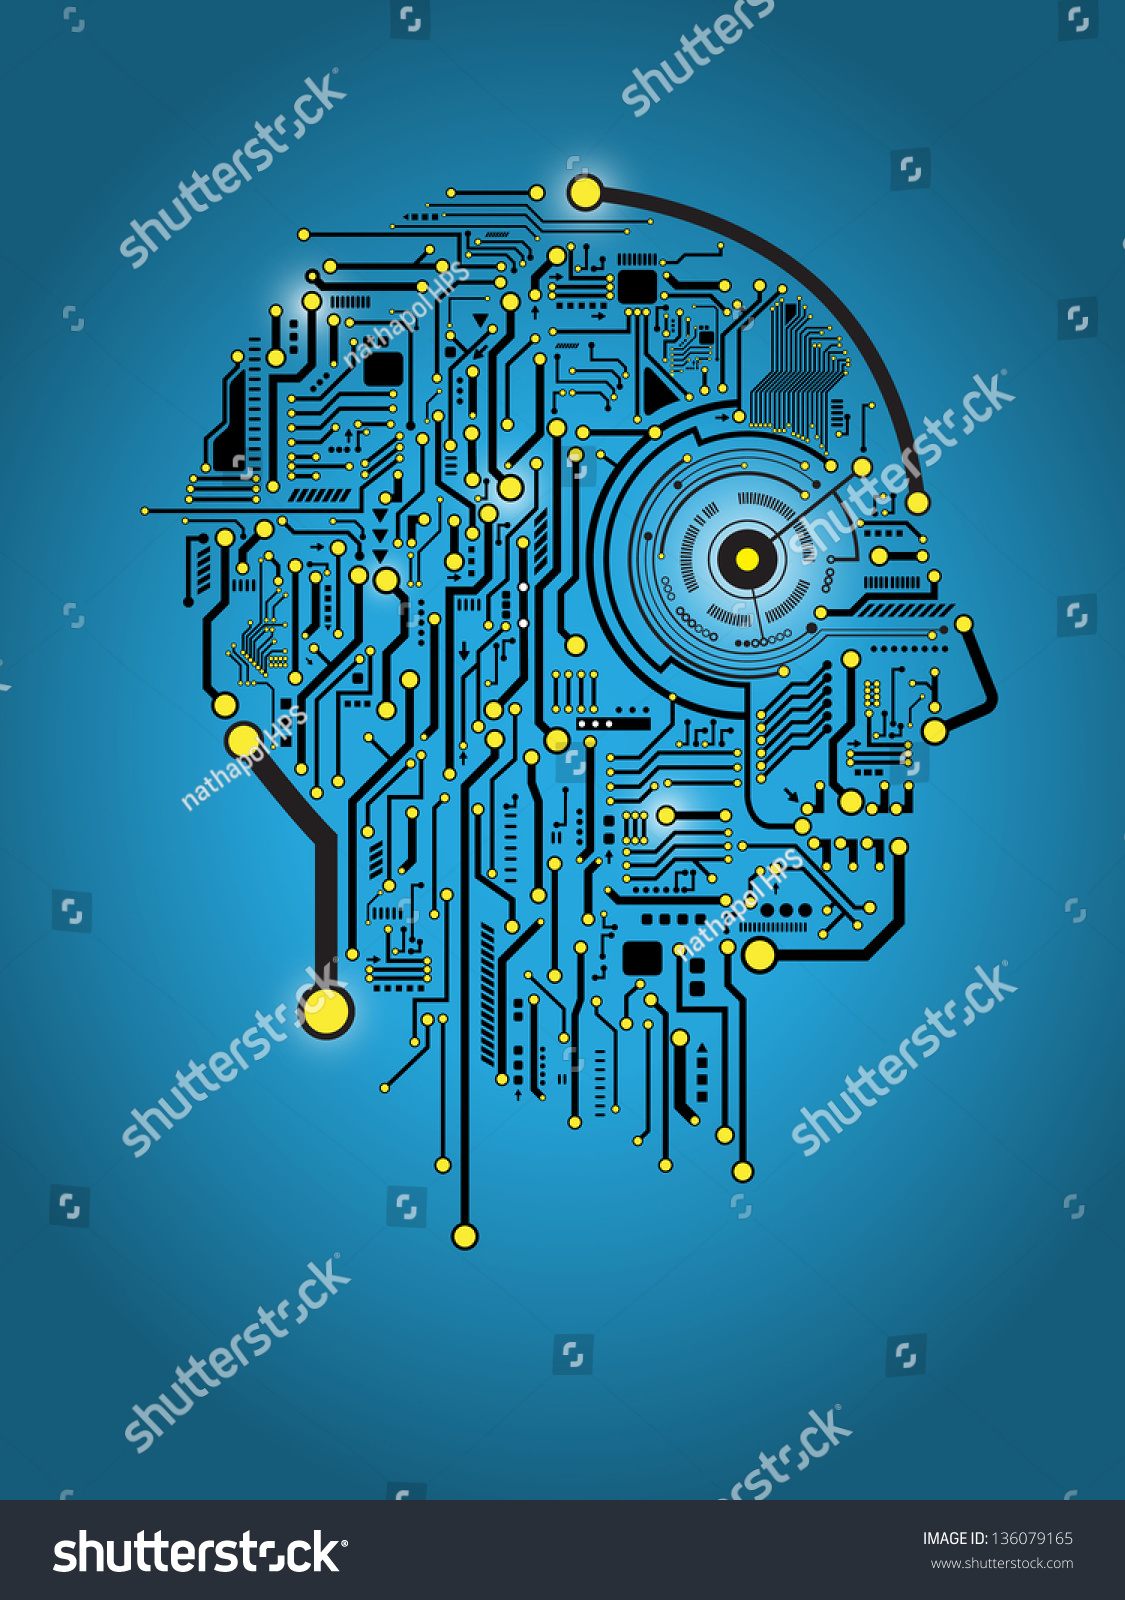 Circuit Abstract Human Head Vector Background - 136079165 : Shutterstock